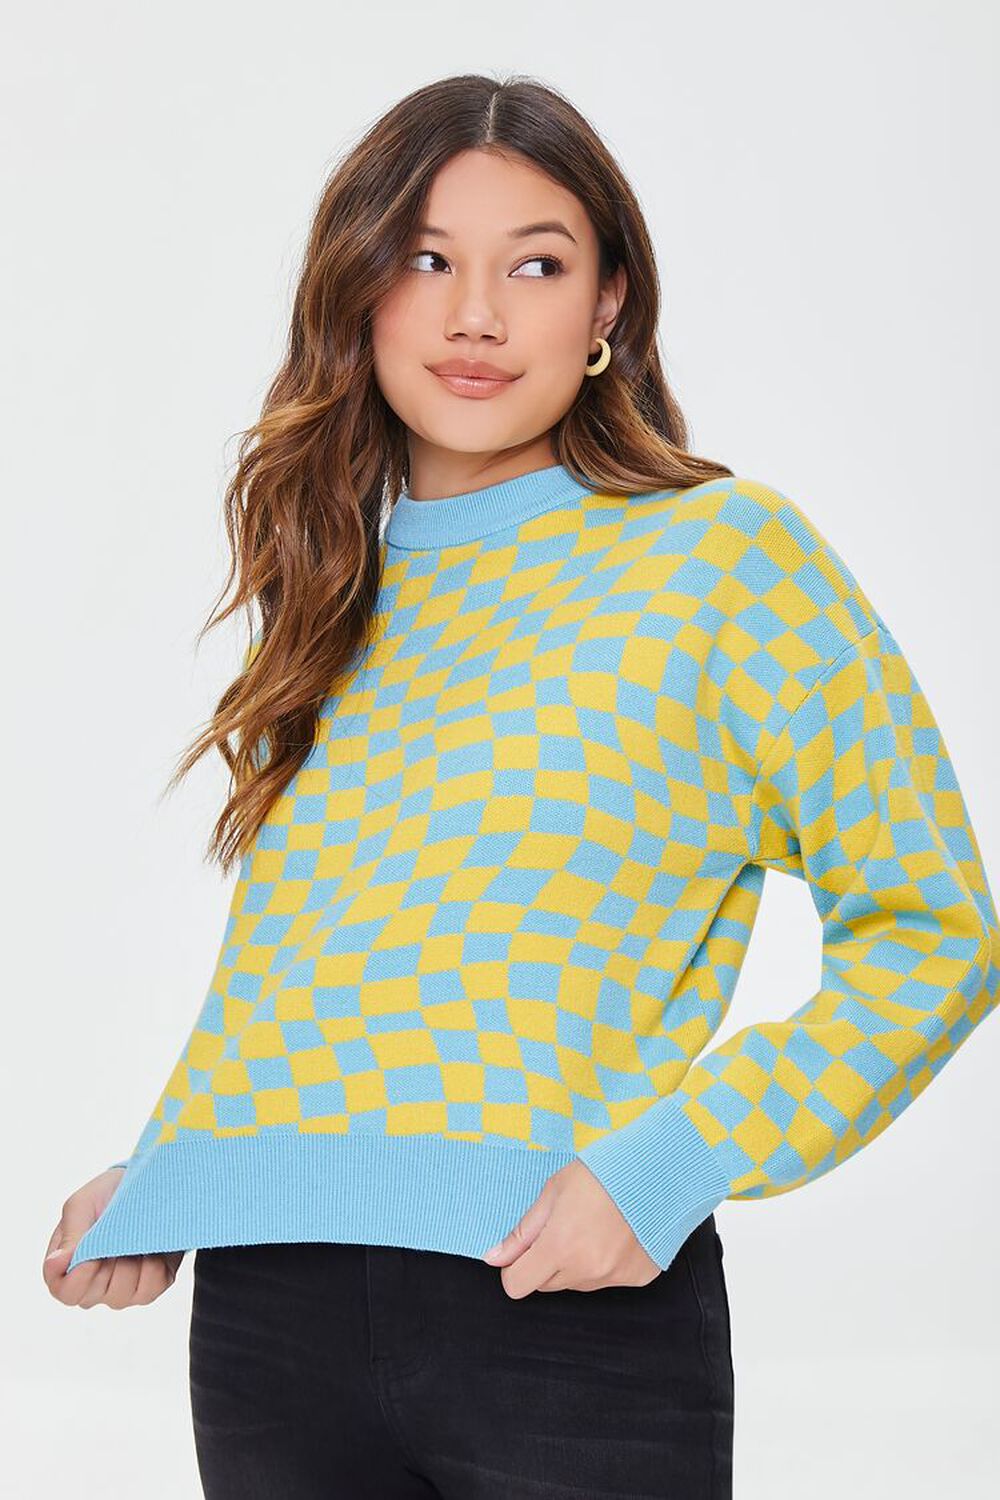 YELLOW/BLUE Checkered Drop-Sleeve Sweater, image 1